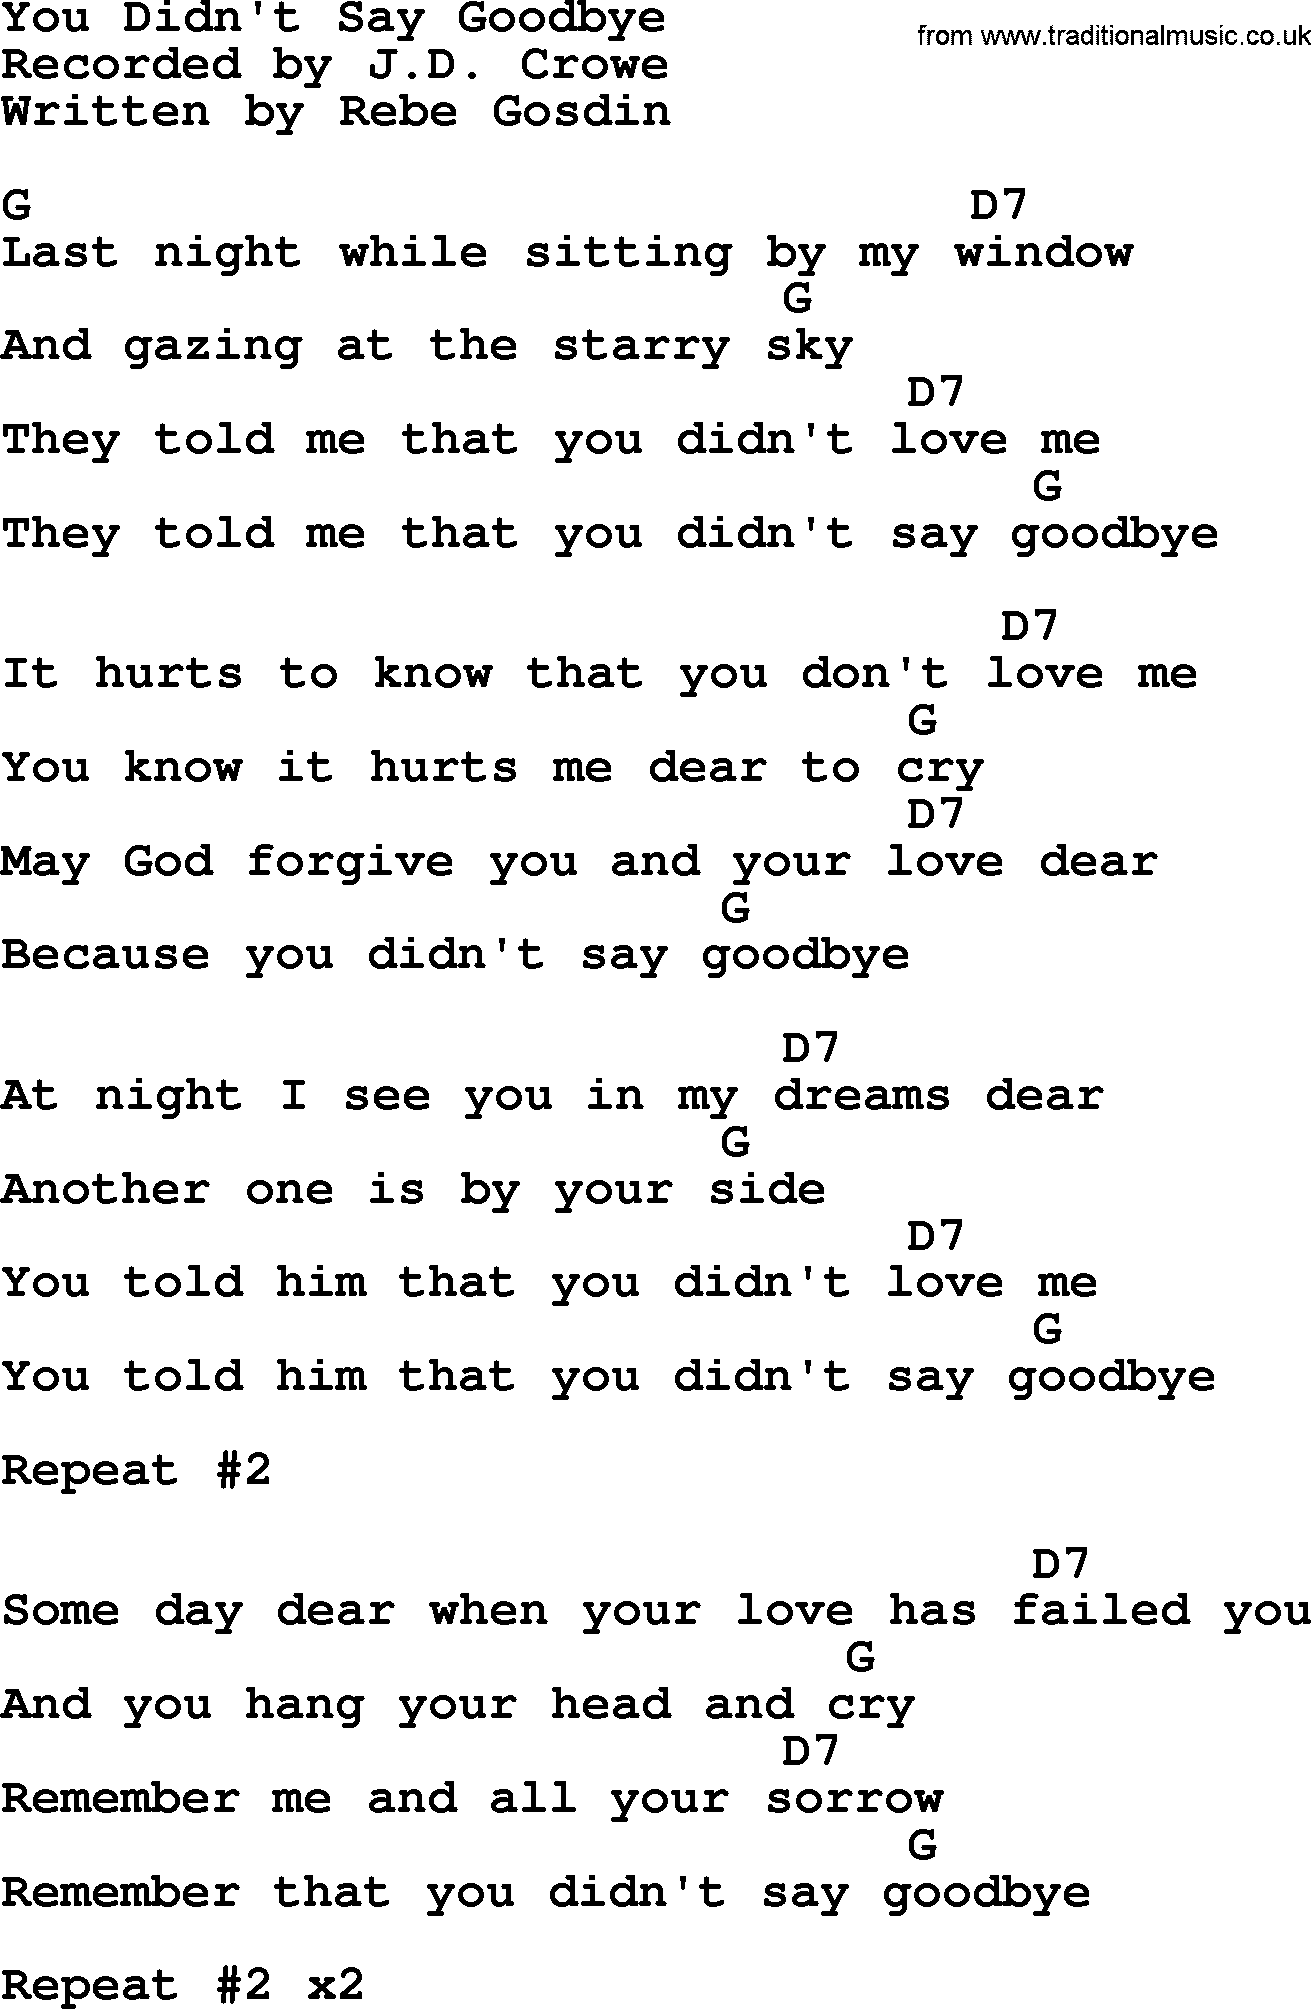 Bluegrass song: You Didn't Say Goodbye, lyrics and chords